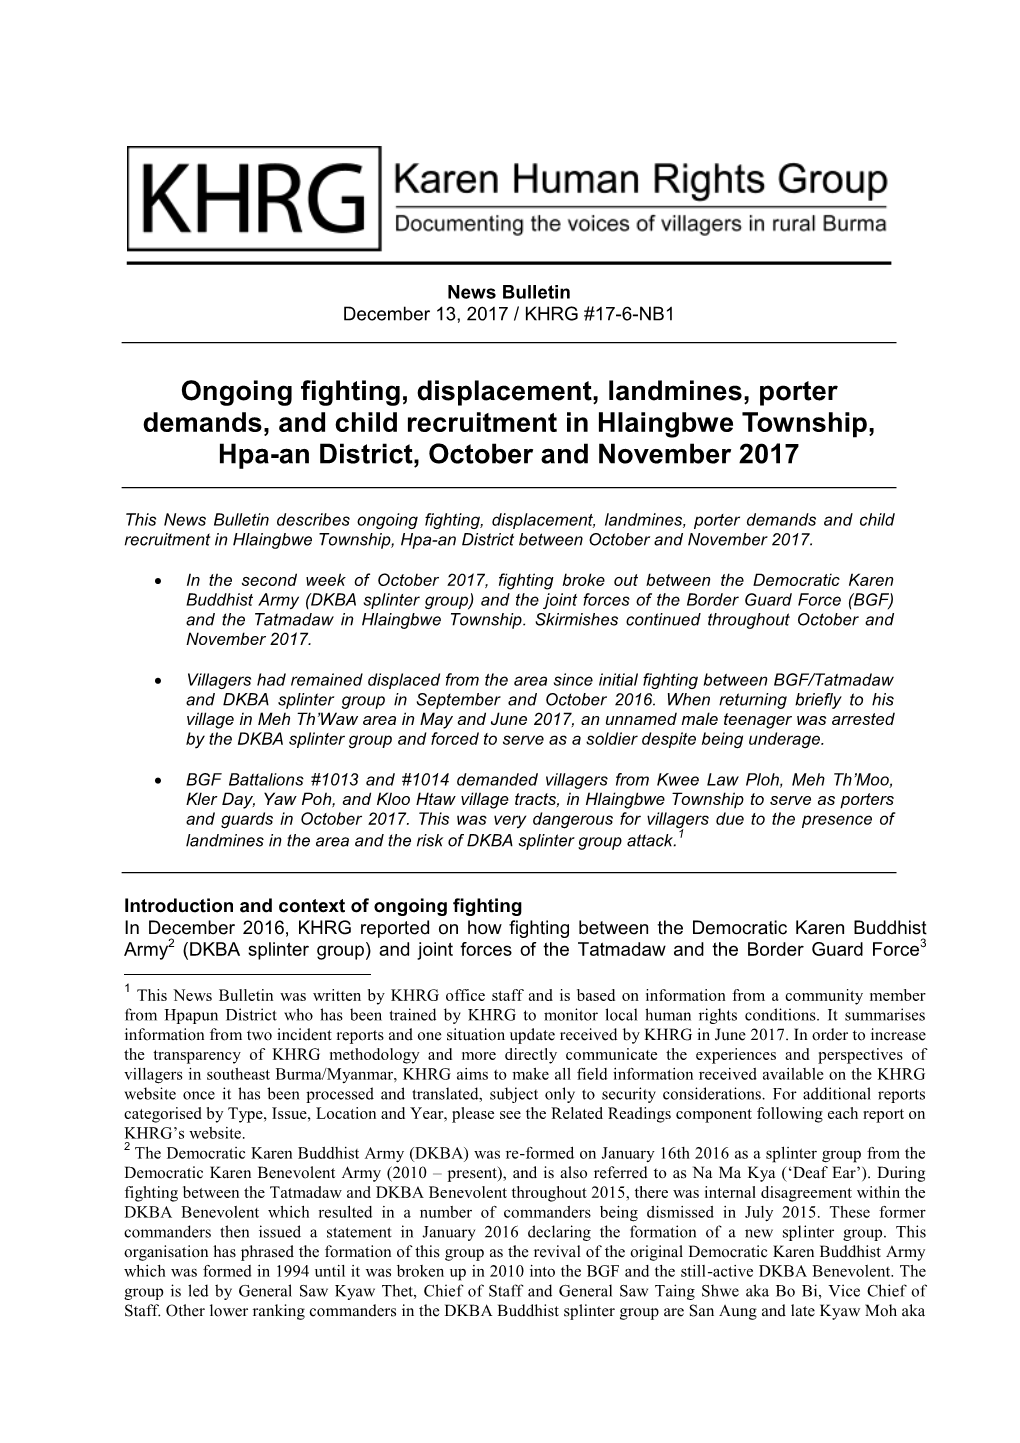 Ongoing Fighting, Displacement, Landmines, Porter Demands, and Child Recruitment in Hlaingbwe Township, Hpa-An District, October and November 2017